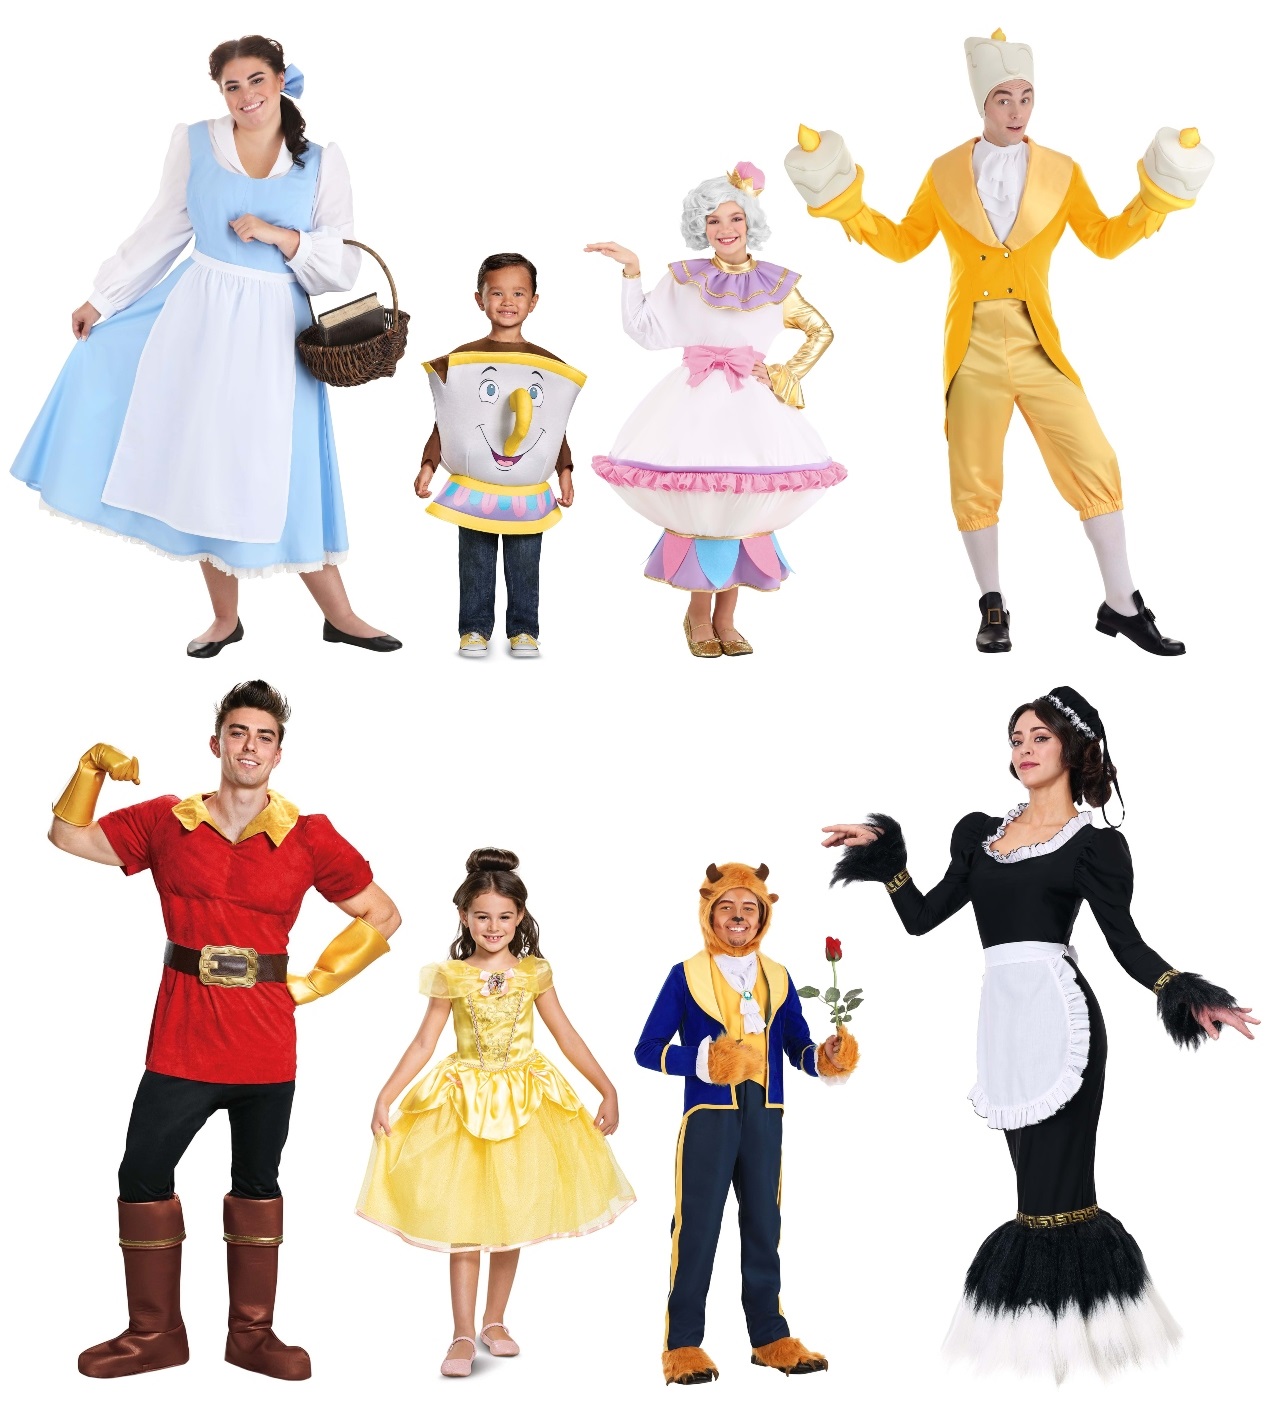 Fairytale and Storybook Costumes for a Happily Ever After [Costume Guide] -   Blog